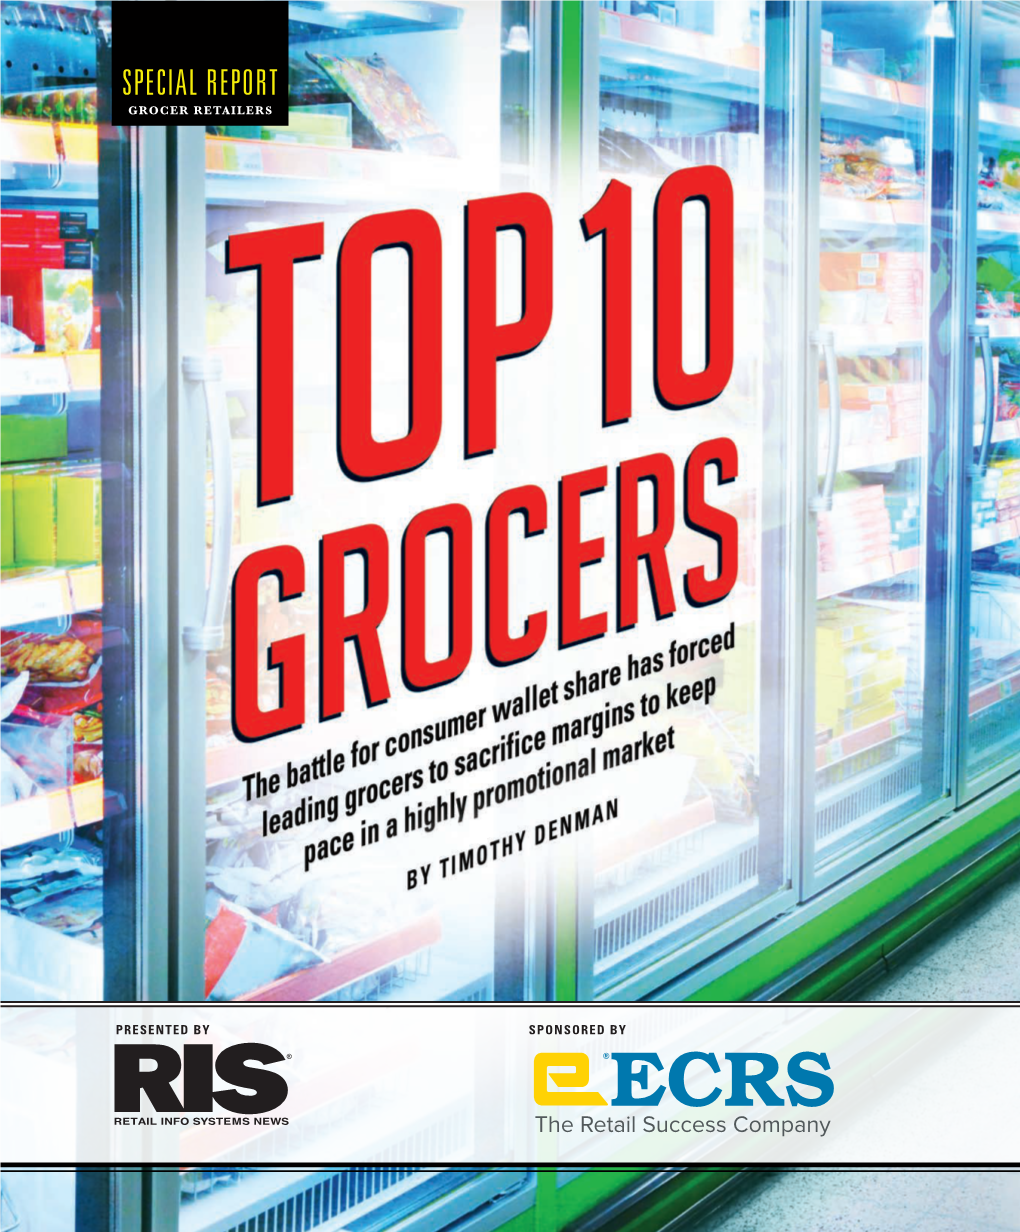 Special Report Grocer Retailers